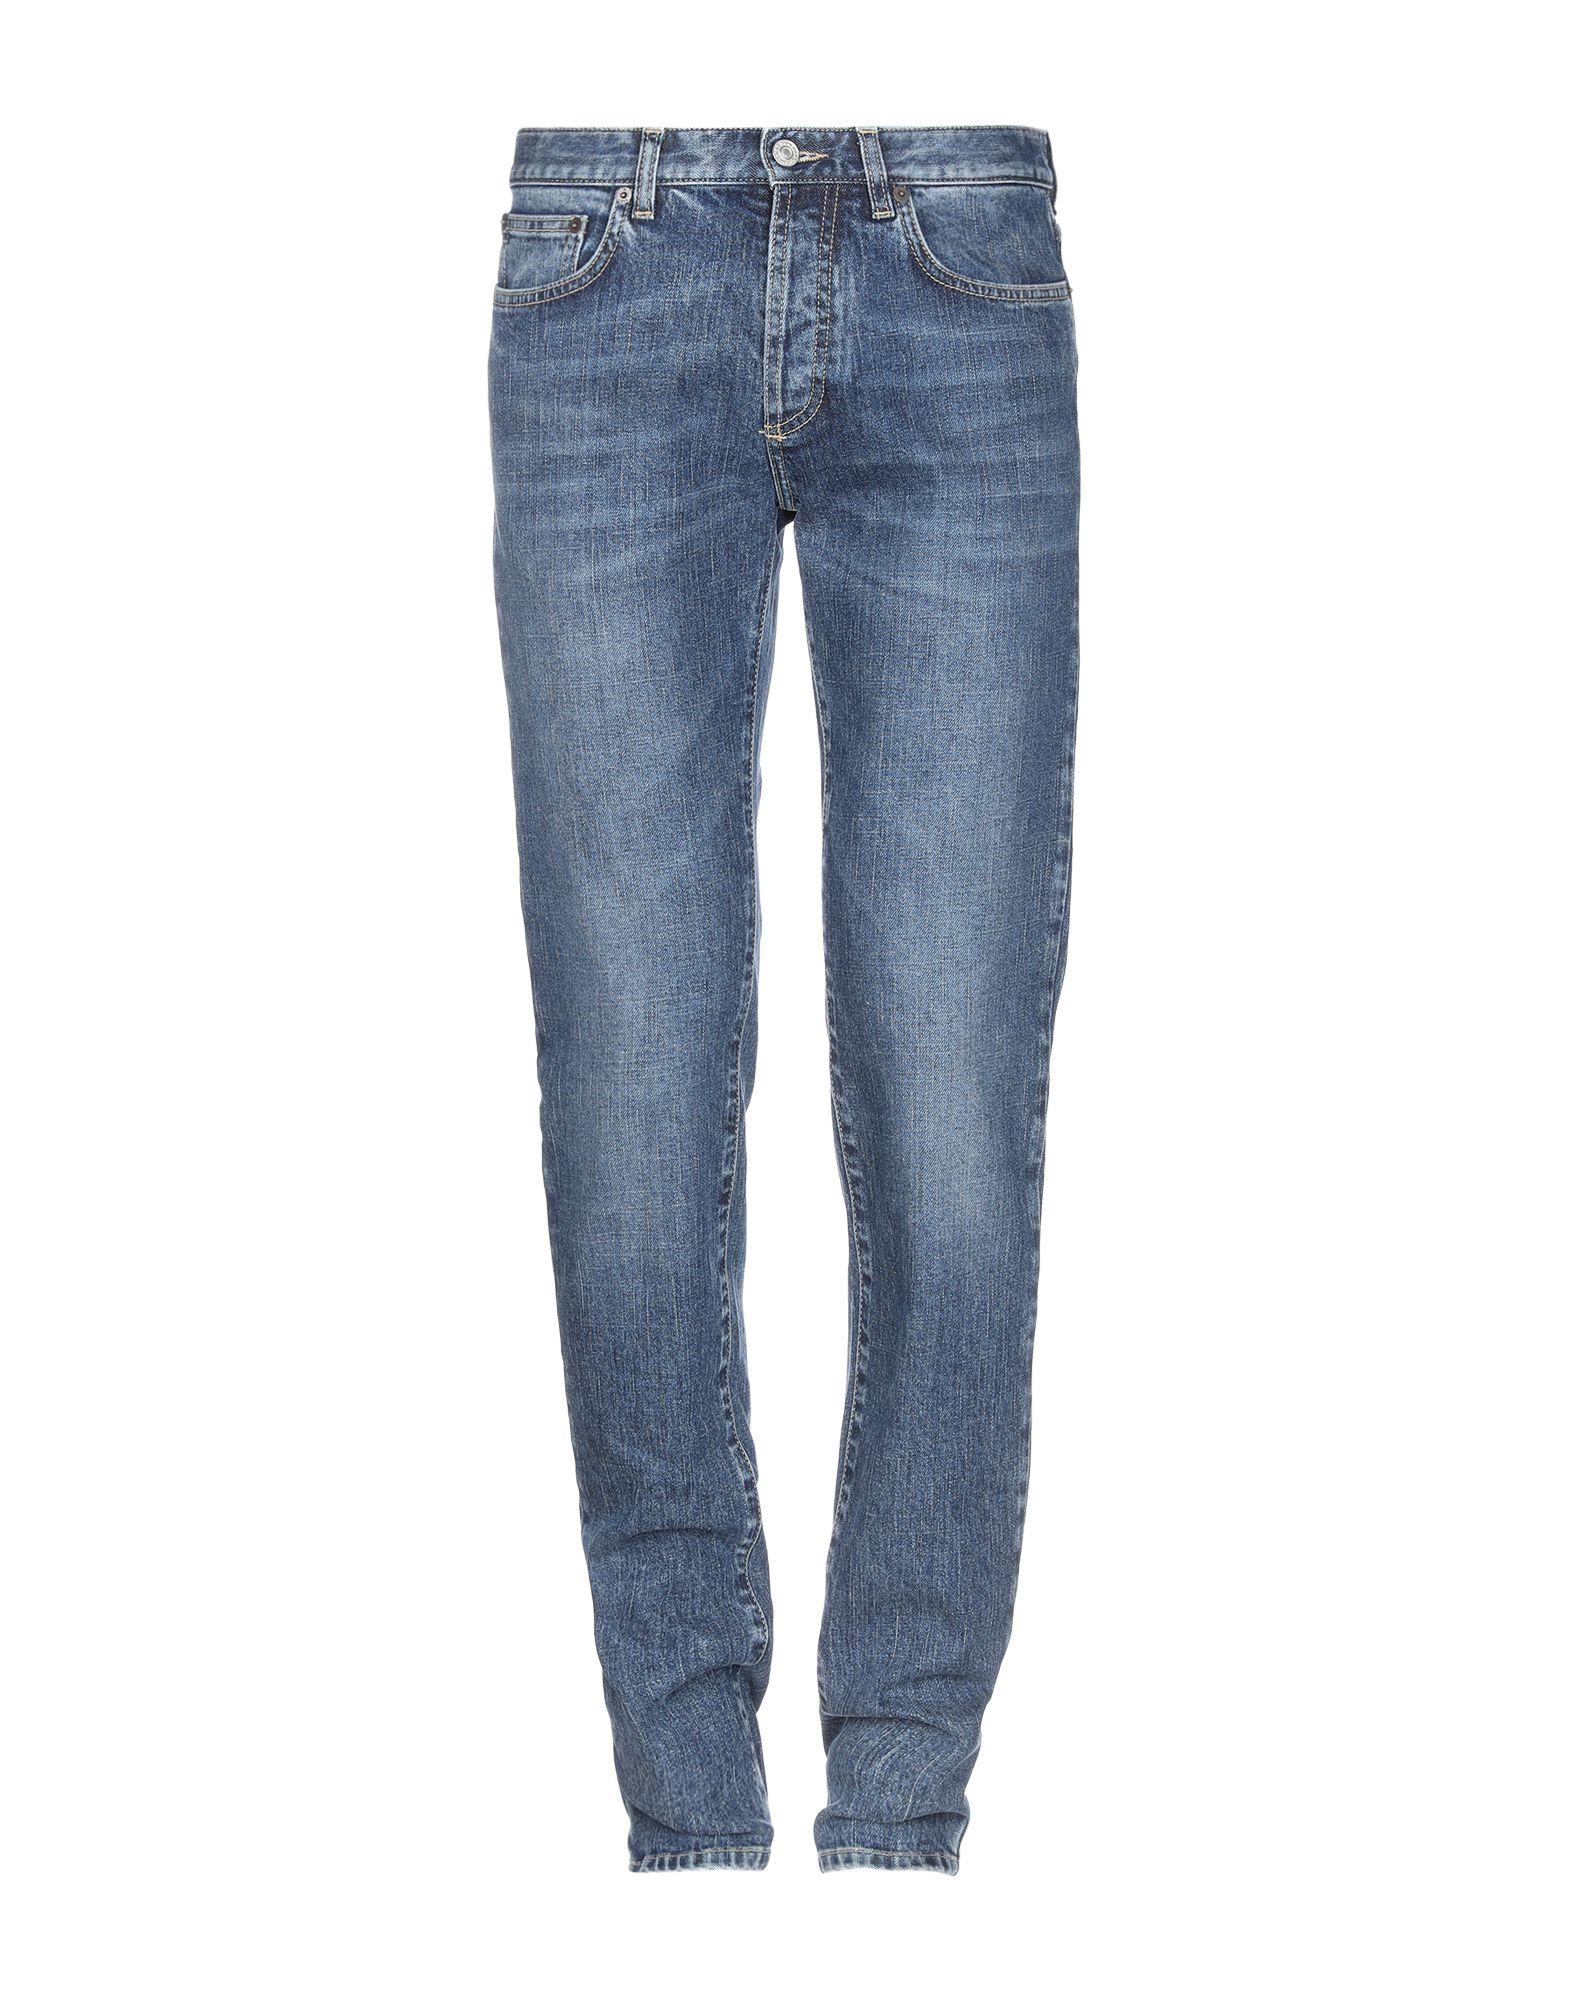 Givenchy Denim Trousers in Blue for Men - Lyst